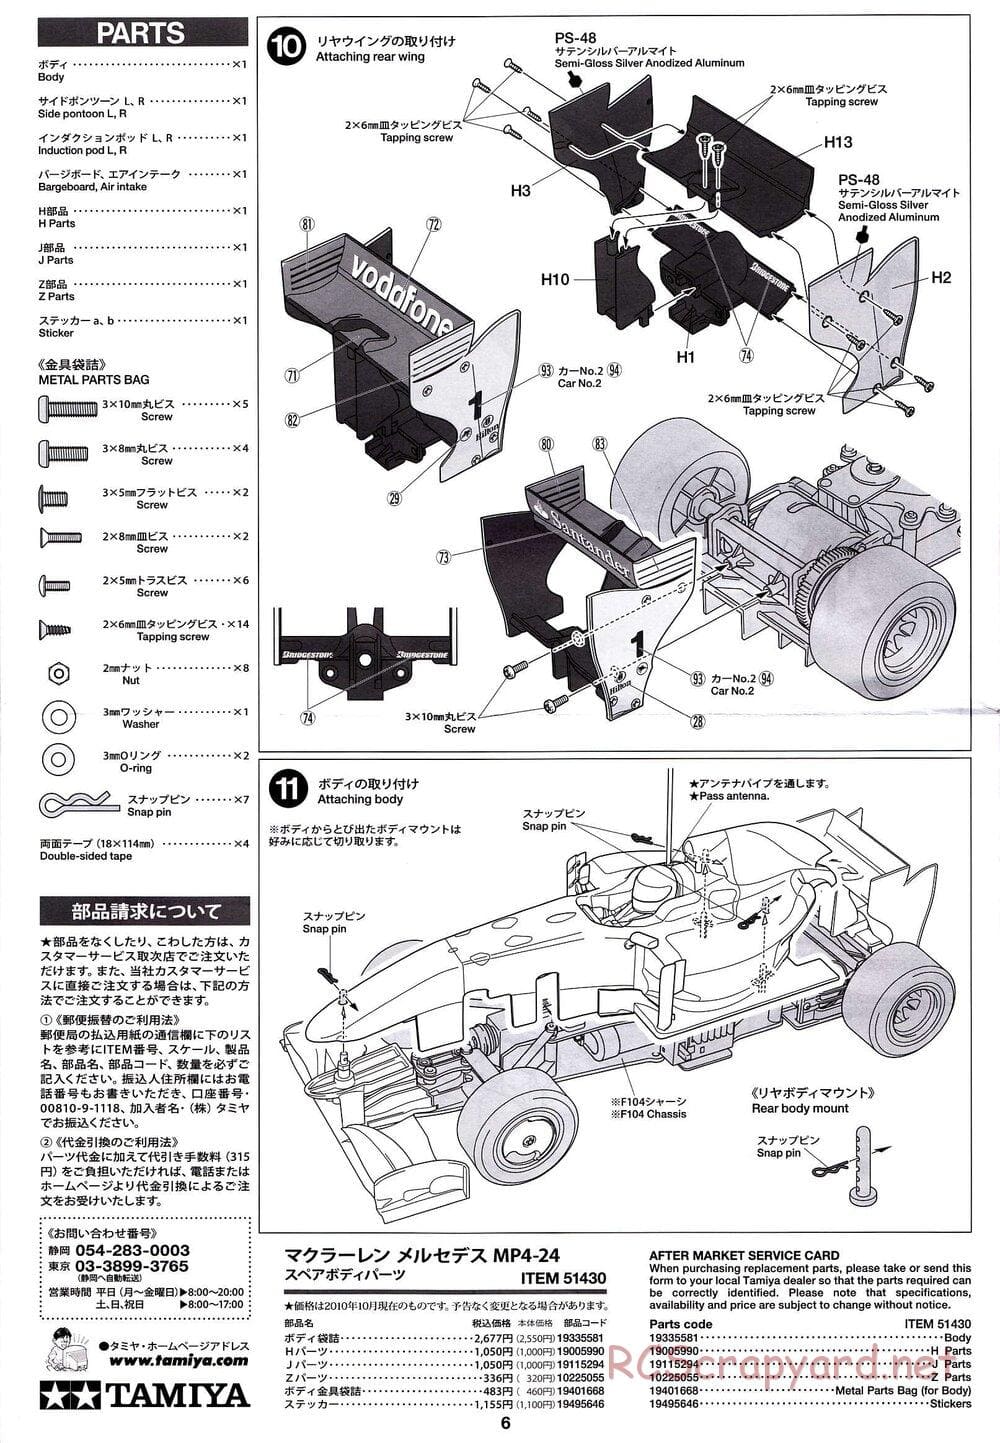 Tamiya - Vodafone McLaren Mercedes MP4-24 - F104 Chassis - Body Manual - Page 6